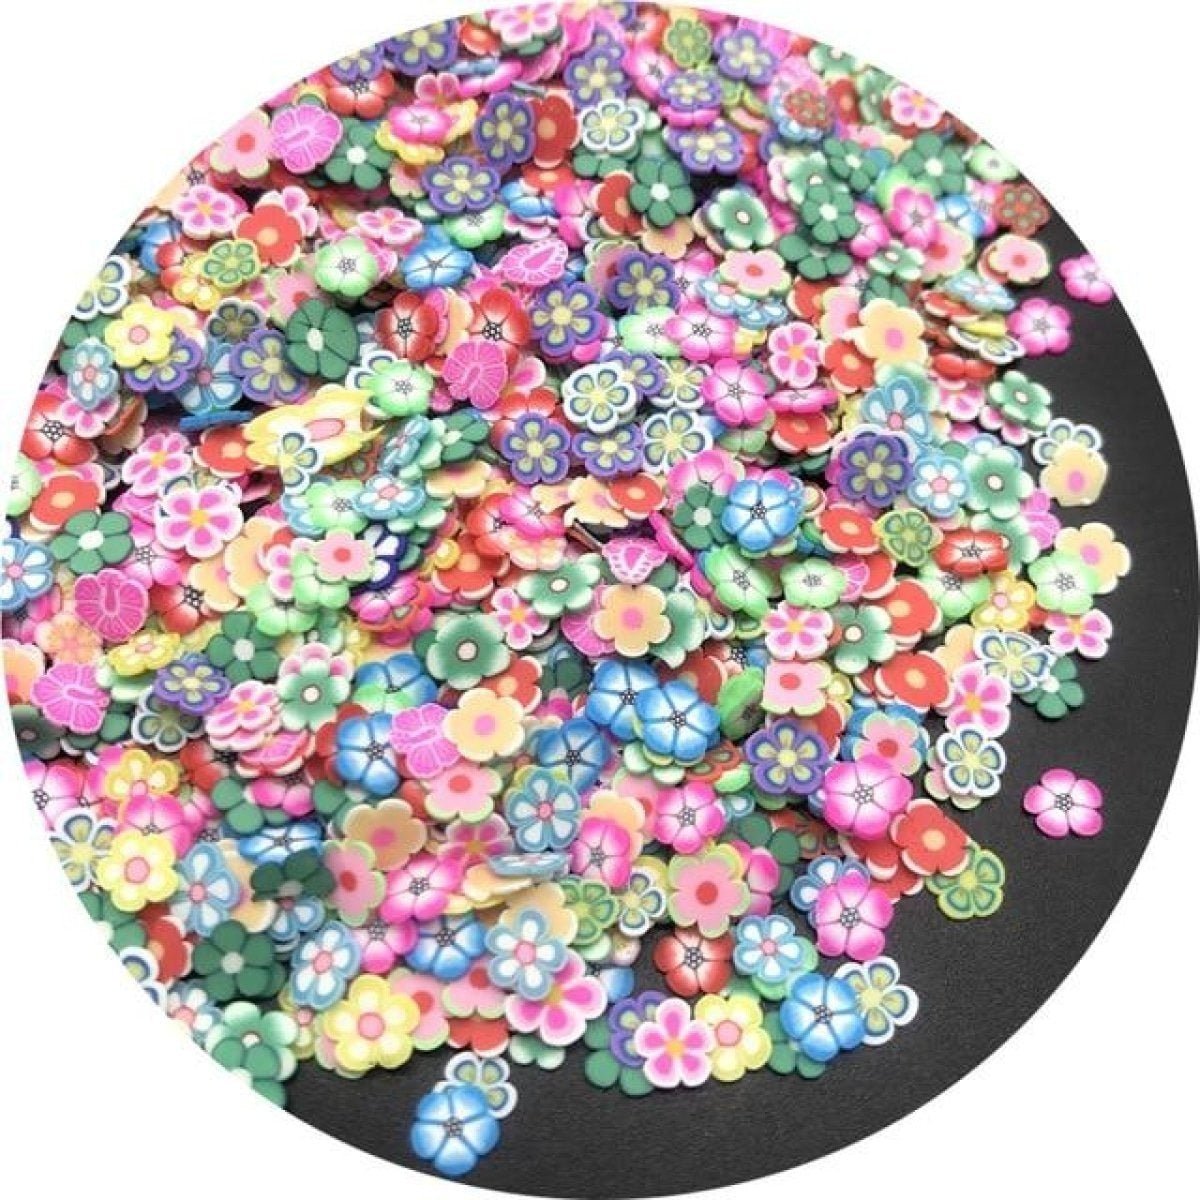 1000pcs 3-6mm Mixed Fruit Animal Clay Beads Decoration Crafts Scrapbook Nail Art - Flowers 2 - - Asia Sell